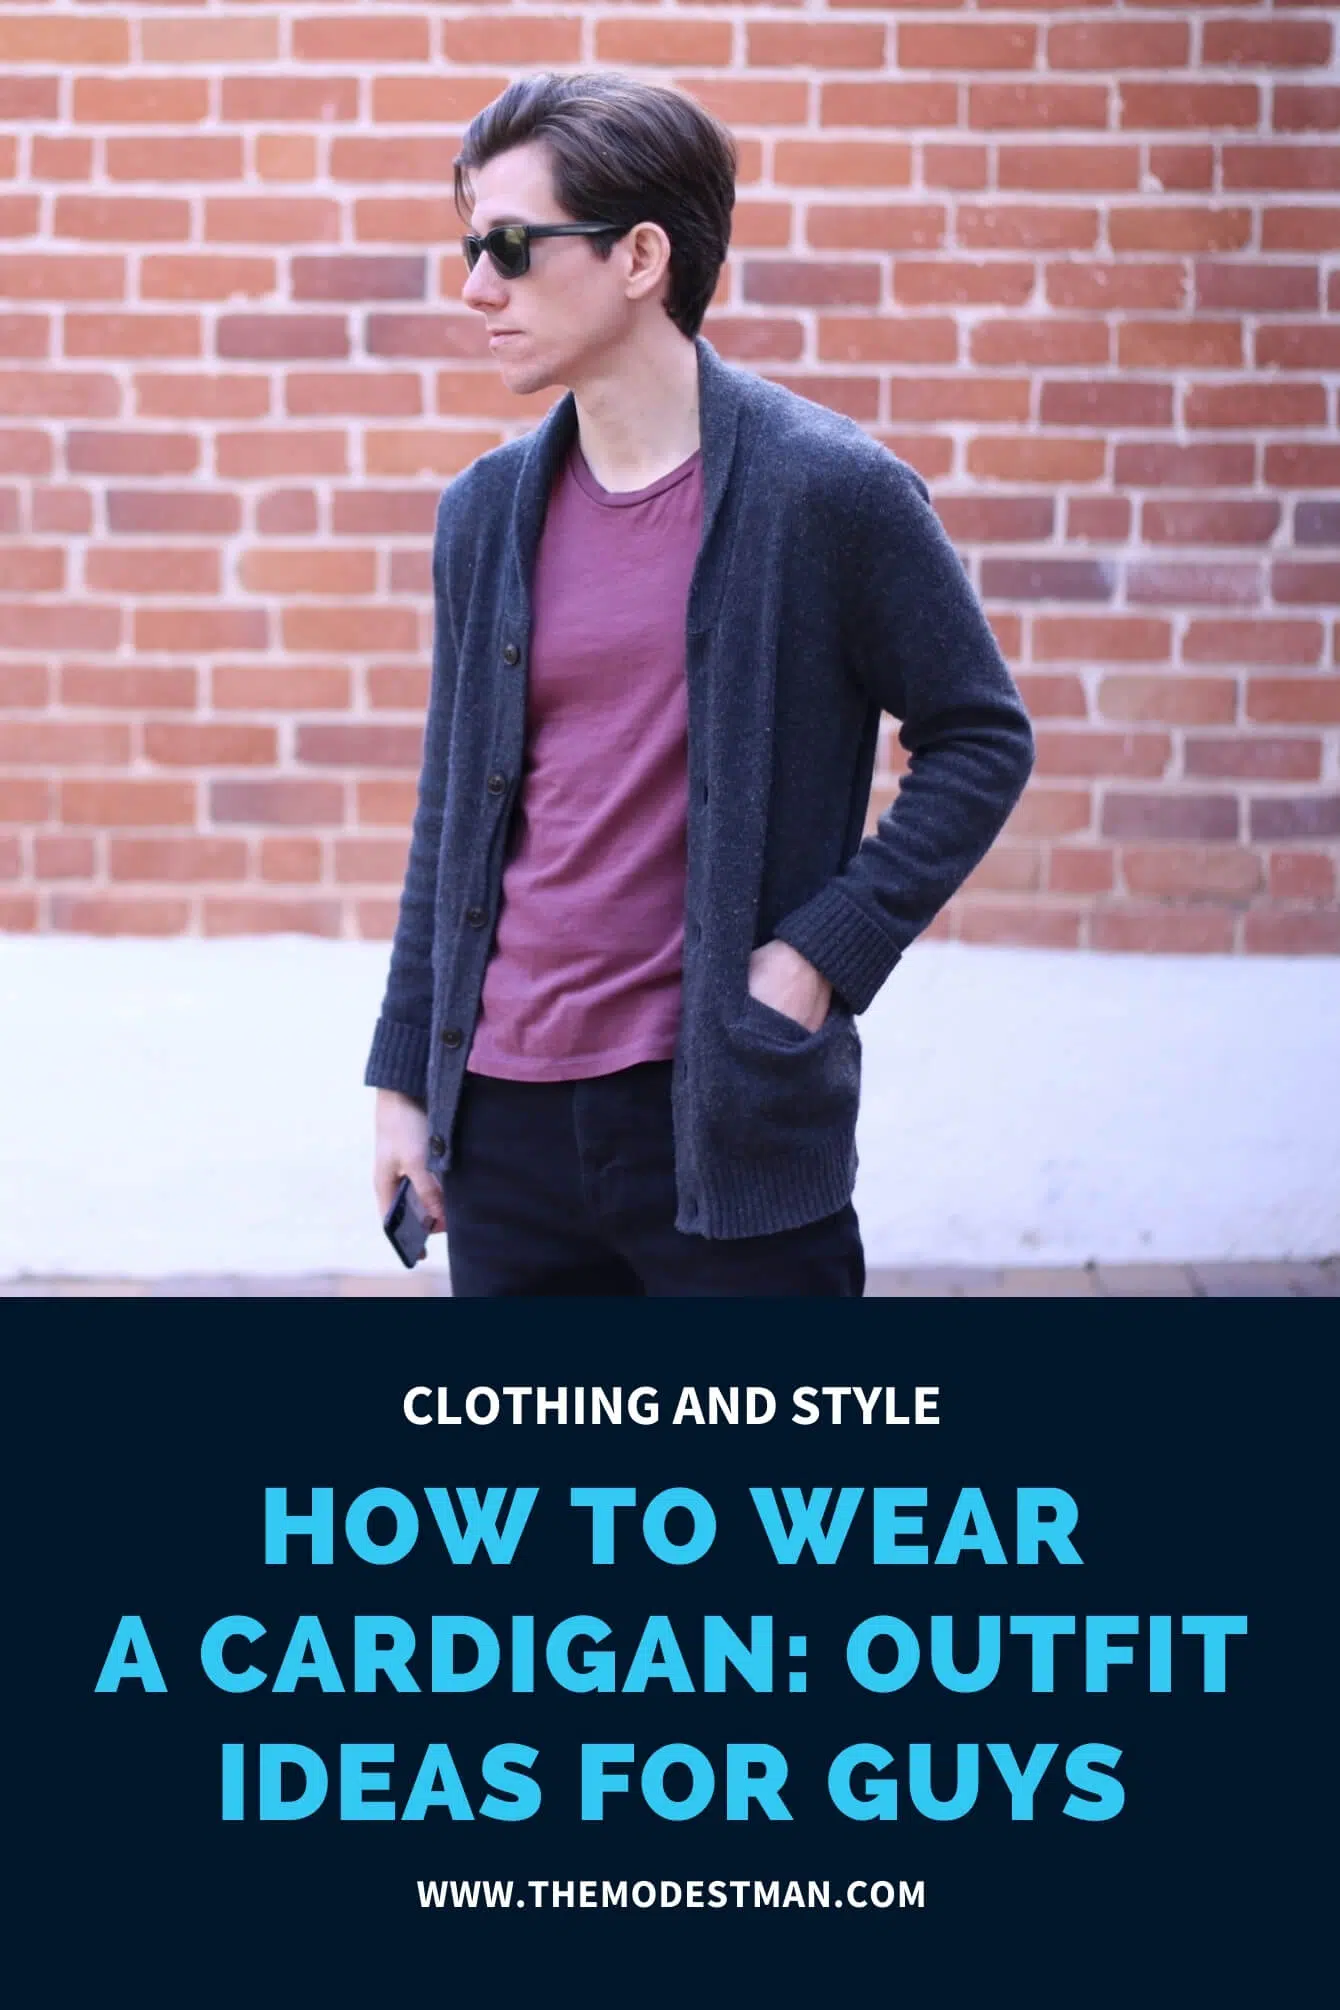 How to Wear a Cardigan